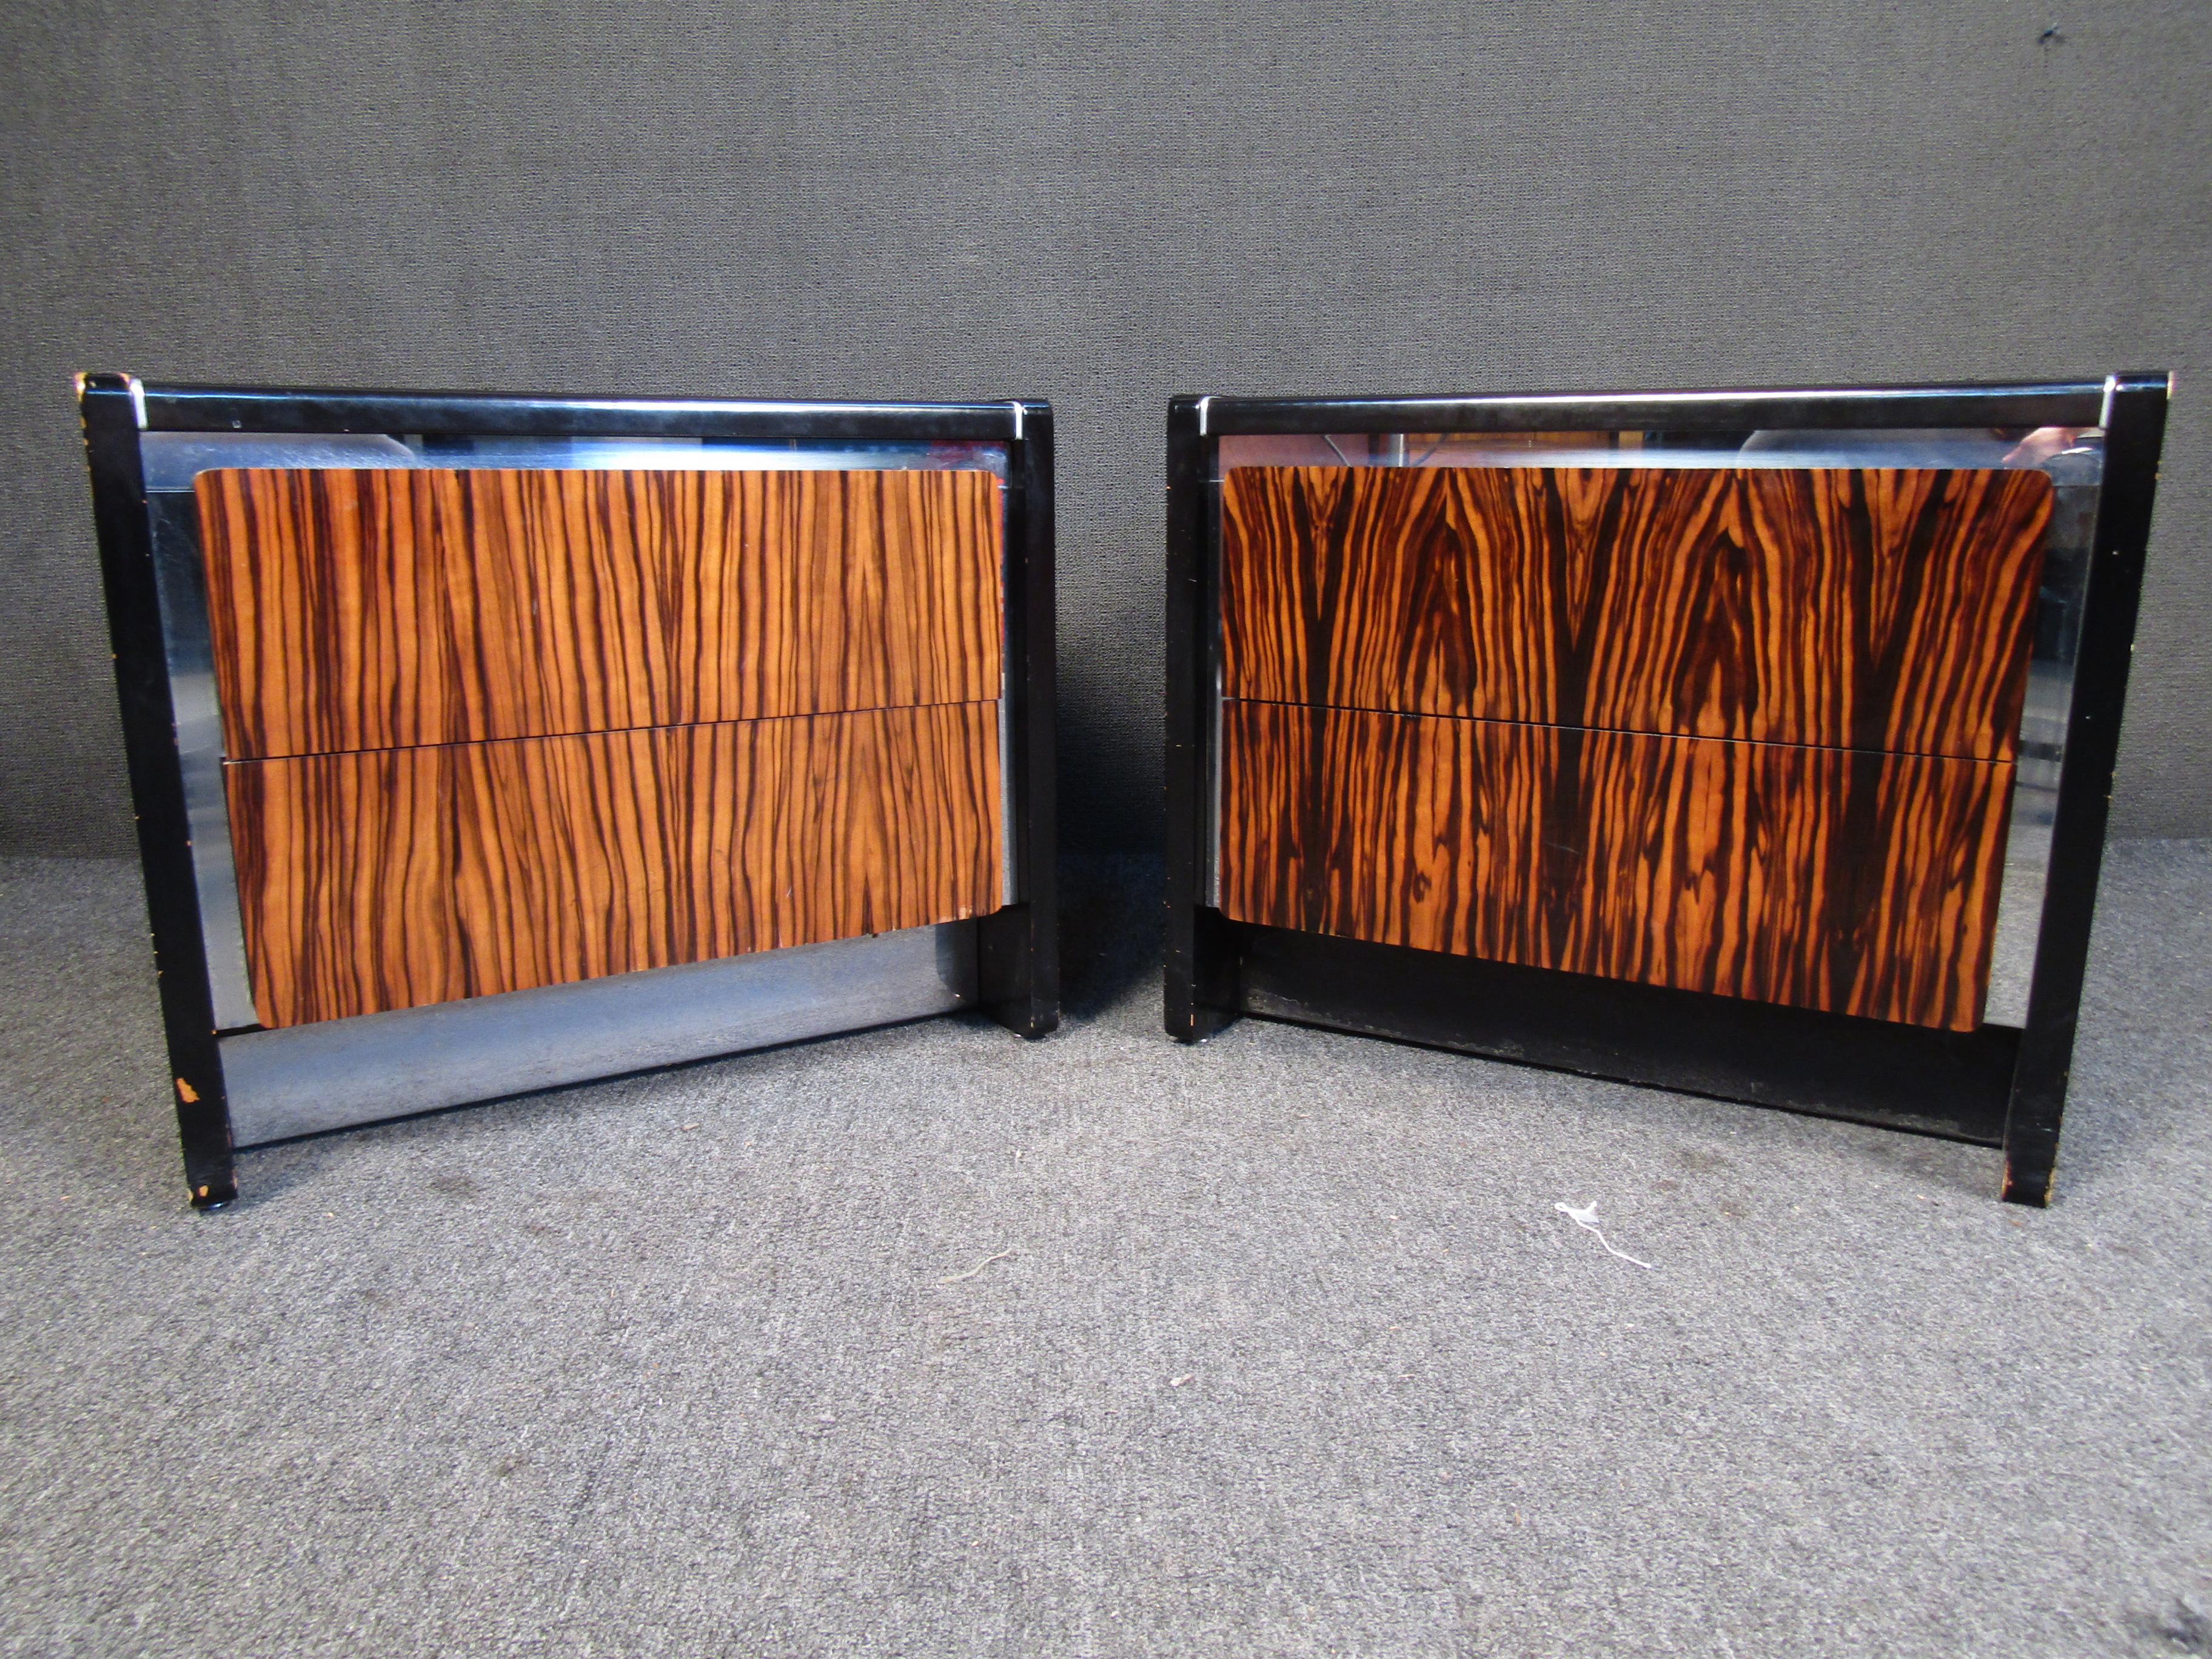 This pair of vintage nightstands by John Stuart includes dovetailed drawers, ebonized surfaces, chrome accents, and radiant rosewood fronts for timeless Mid-Century Modern style. Please confirm item location with seller (NY/NJ).